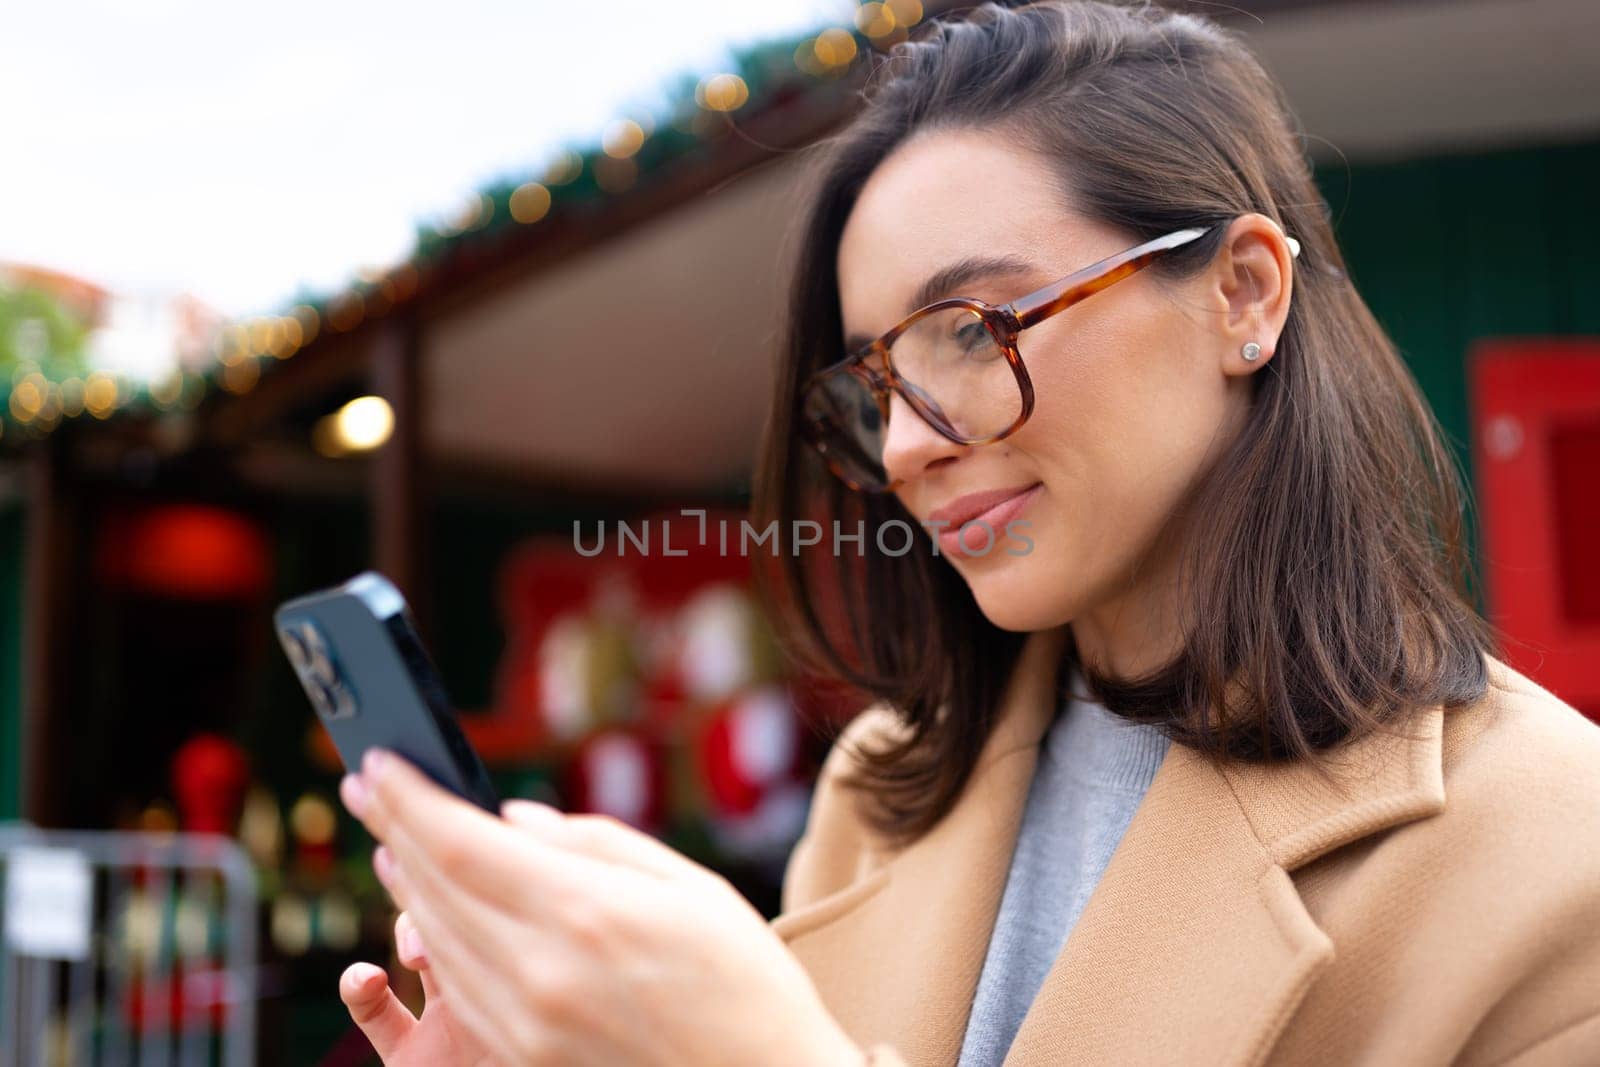 Woman in glasses using mobile phone at day in the city. Happy woman using smartphone dressed stylish trench coat looking device screen